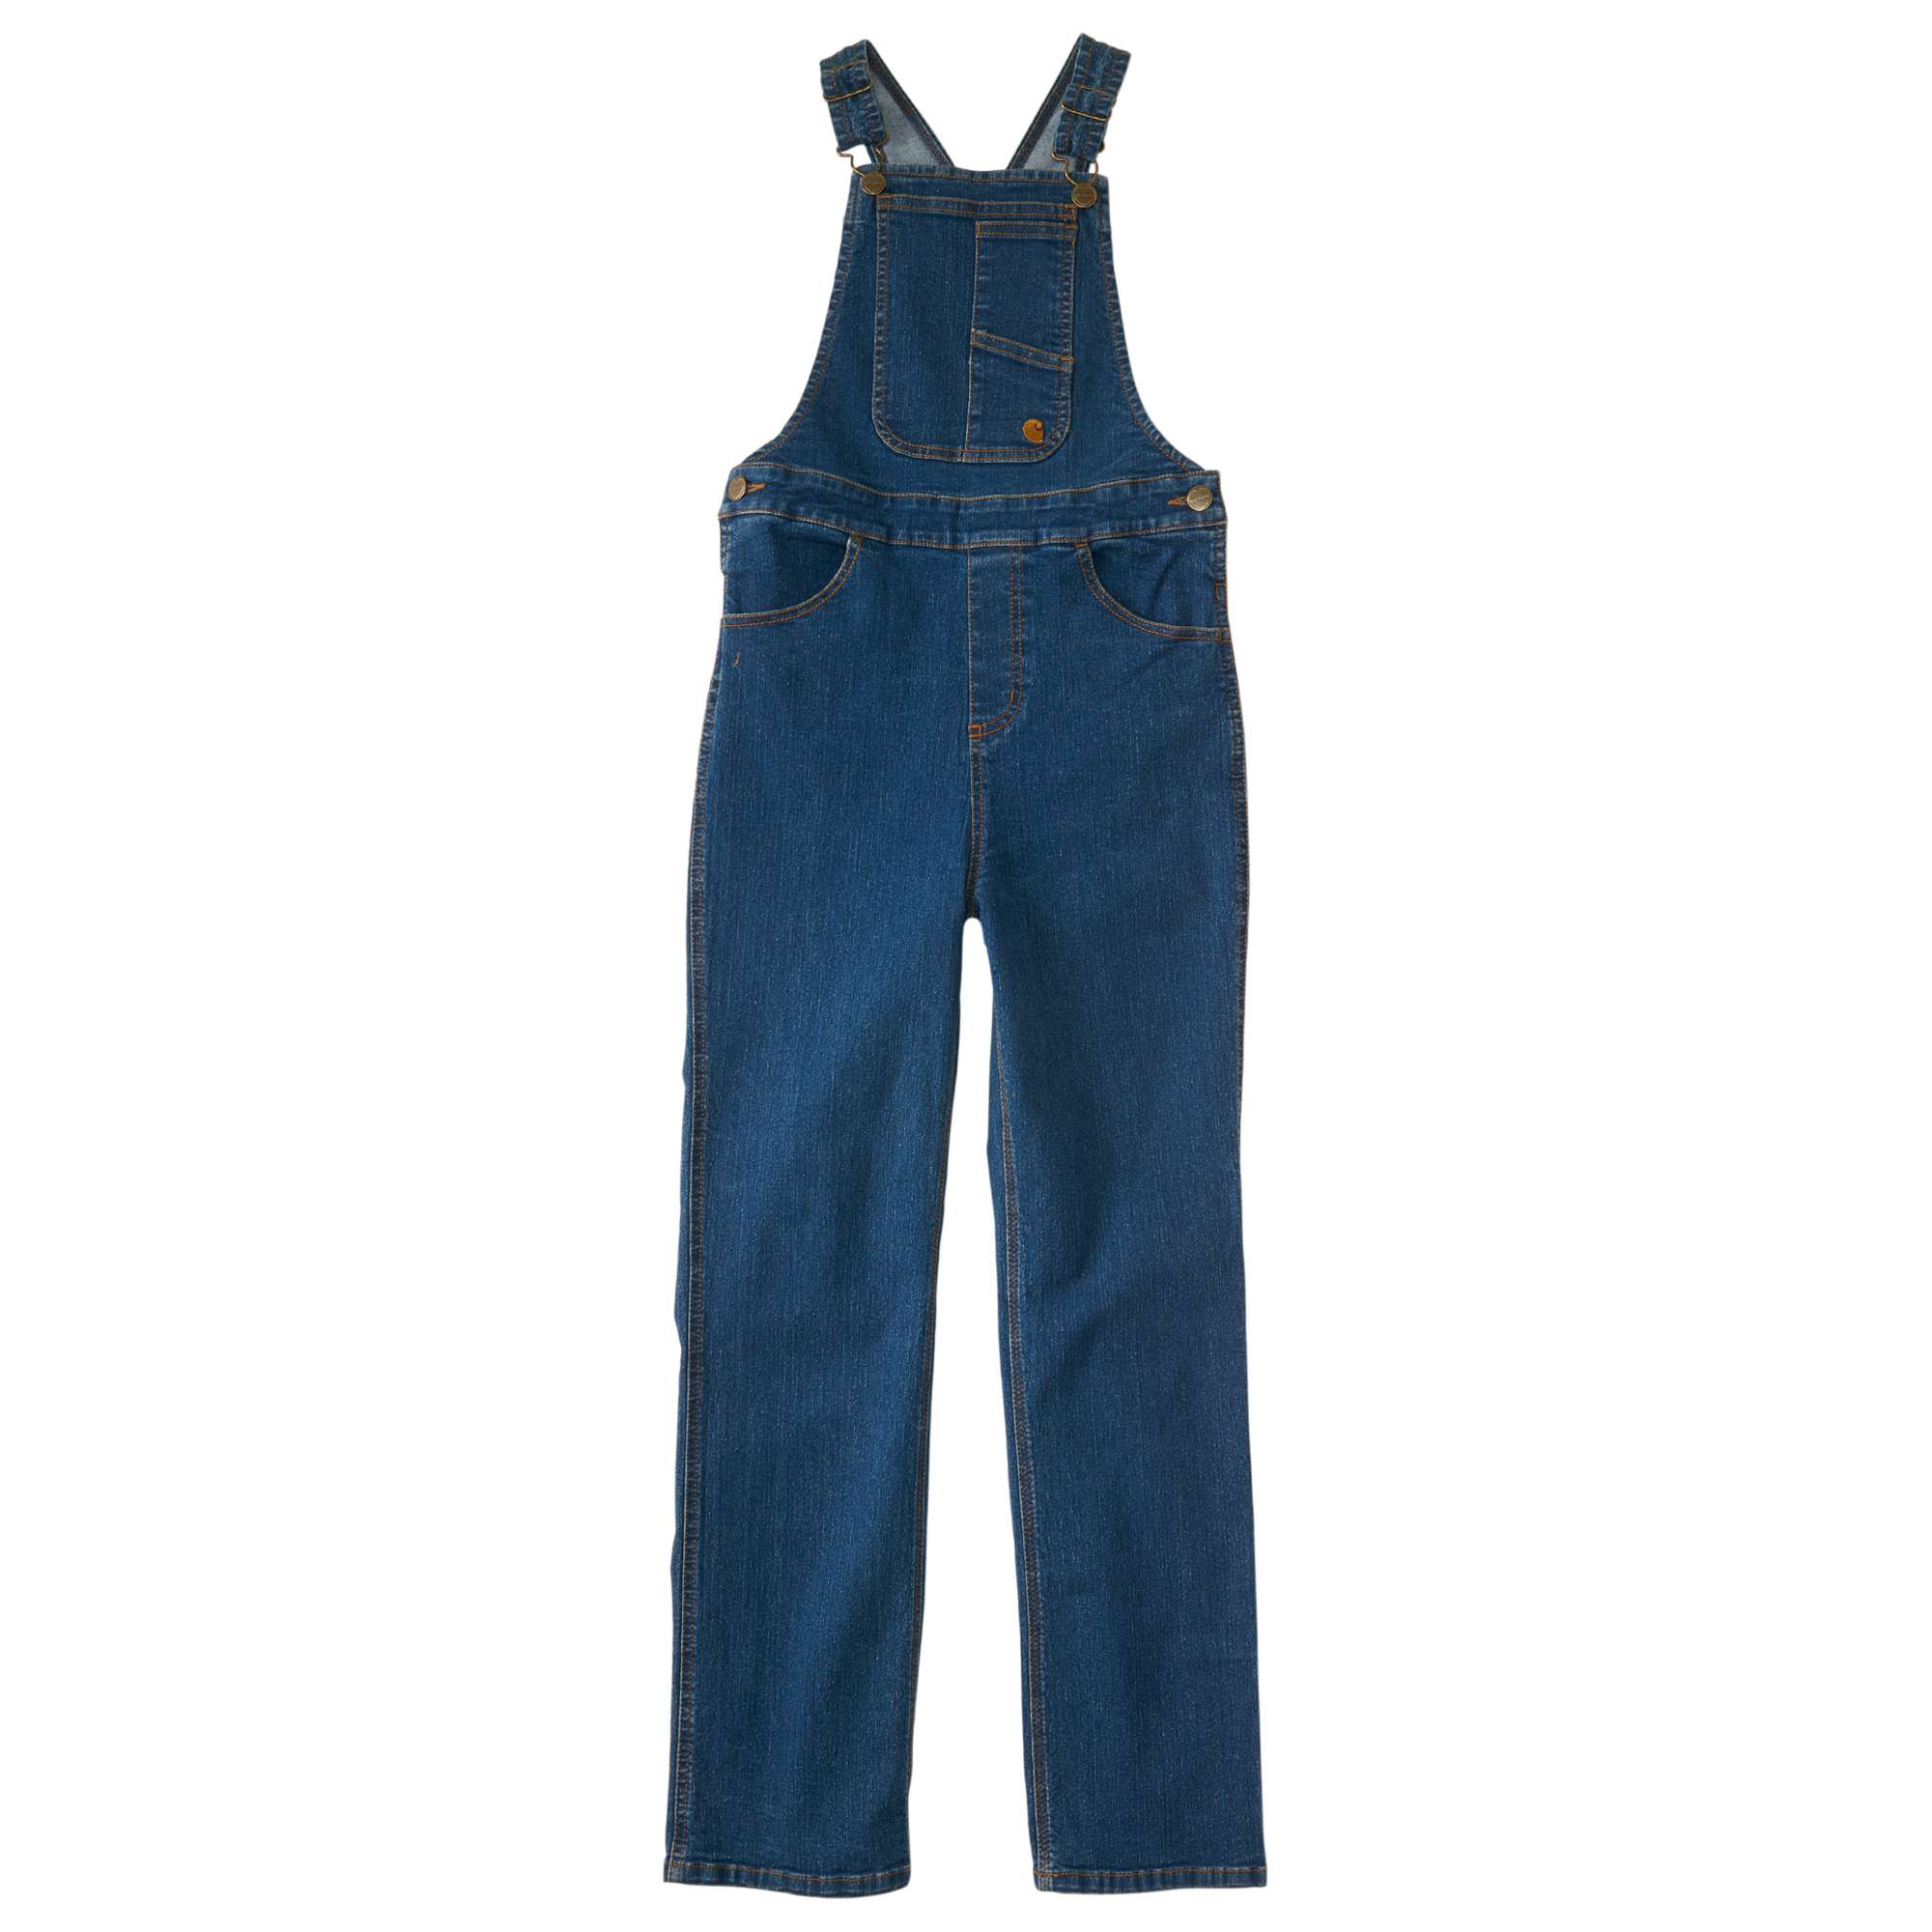 carhartt jeans overall